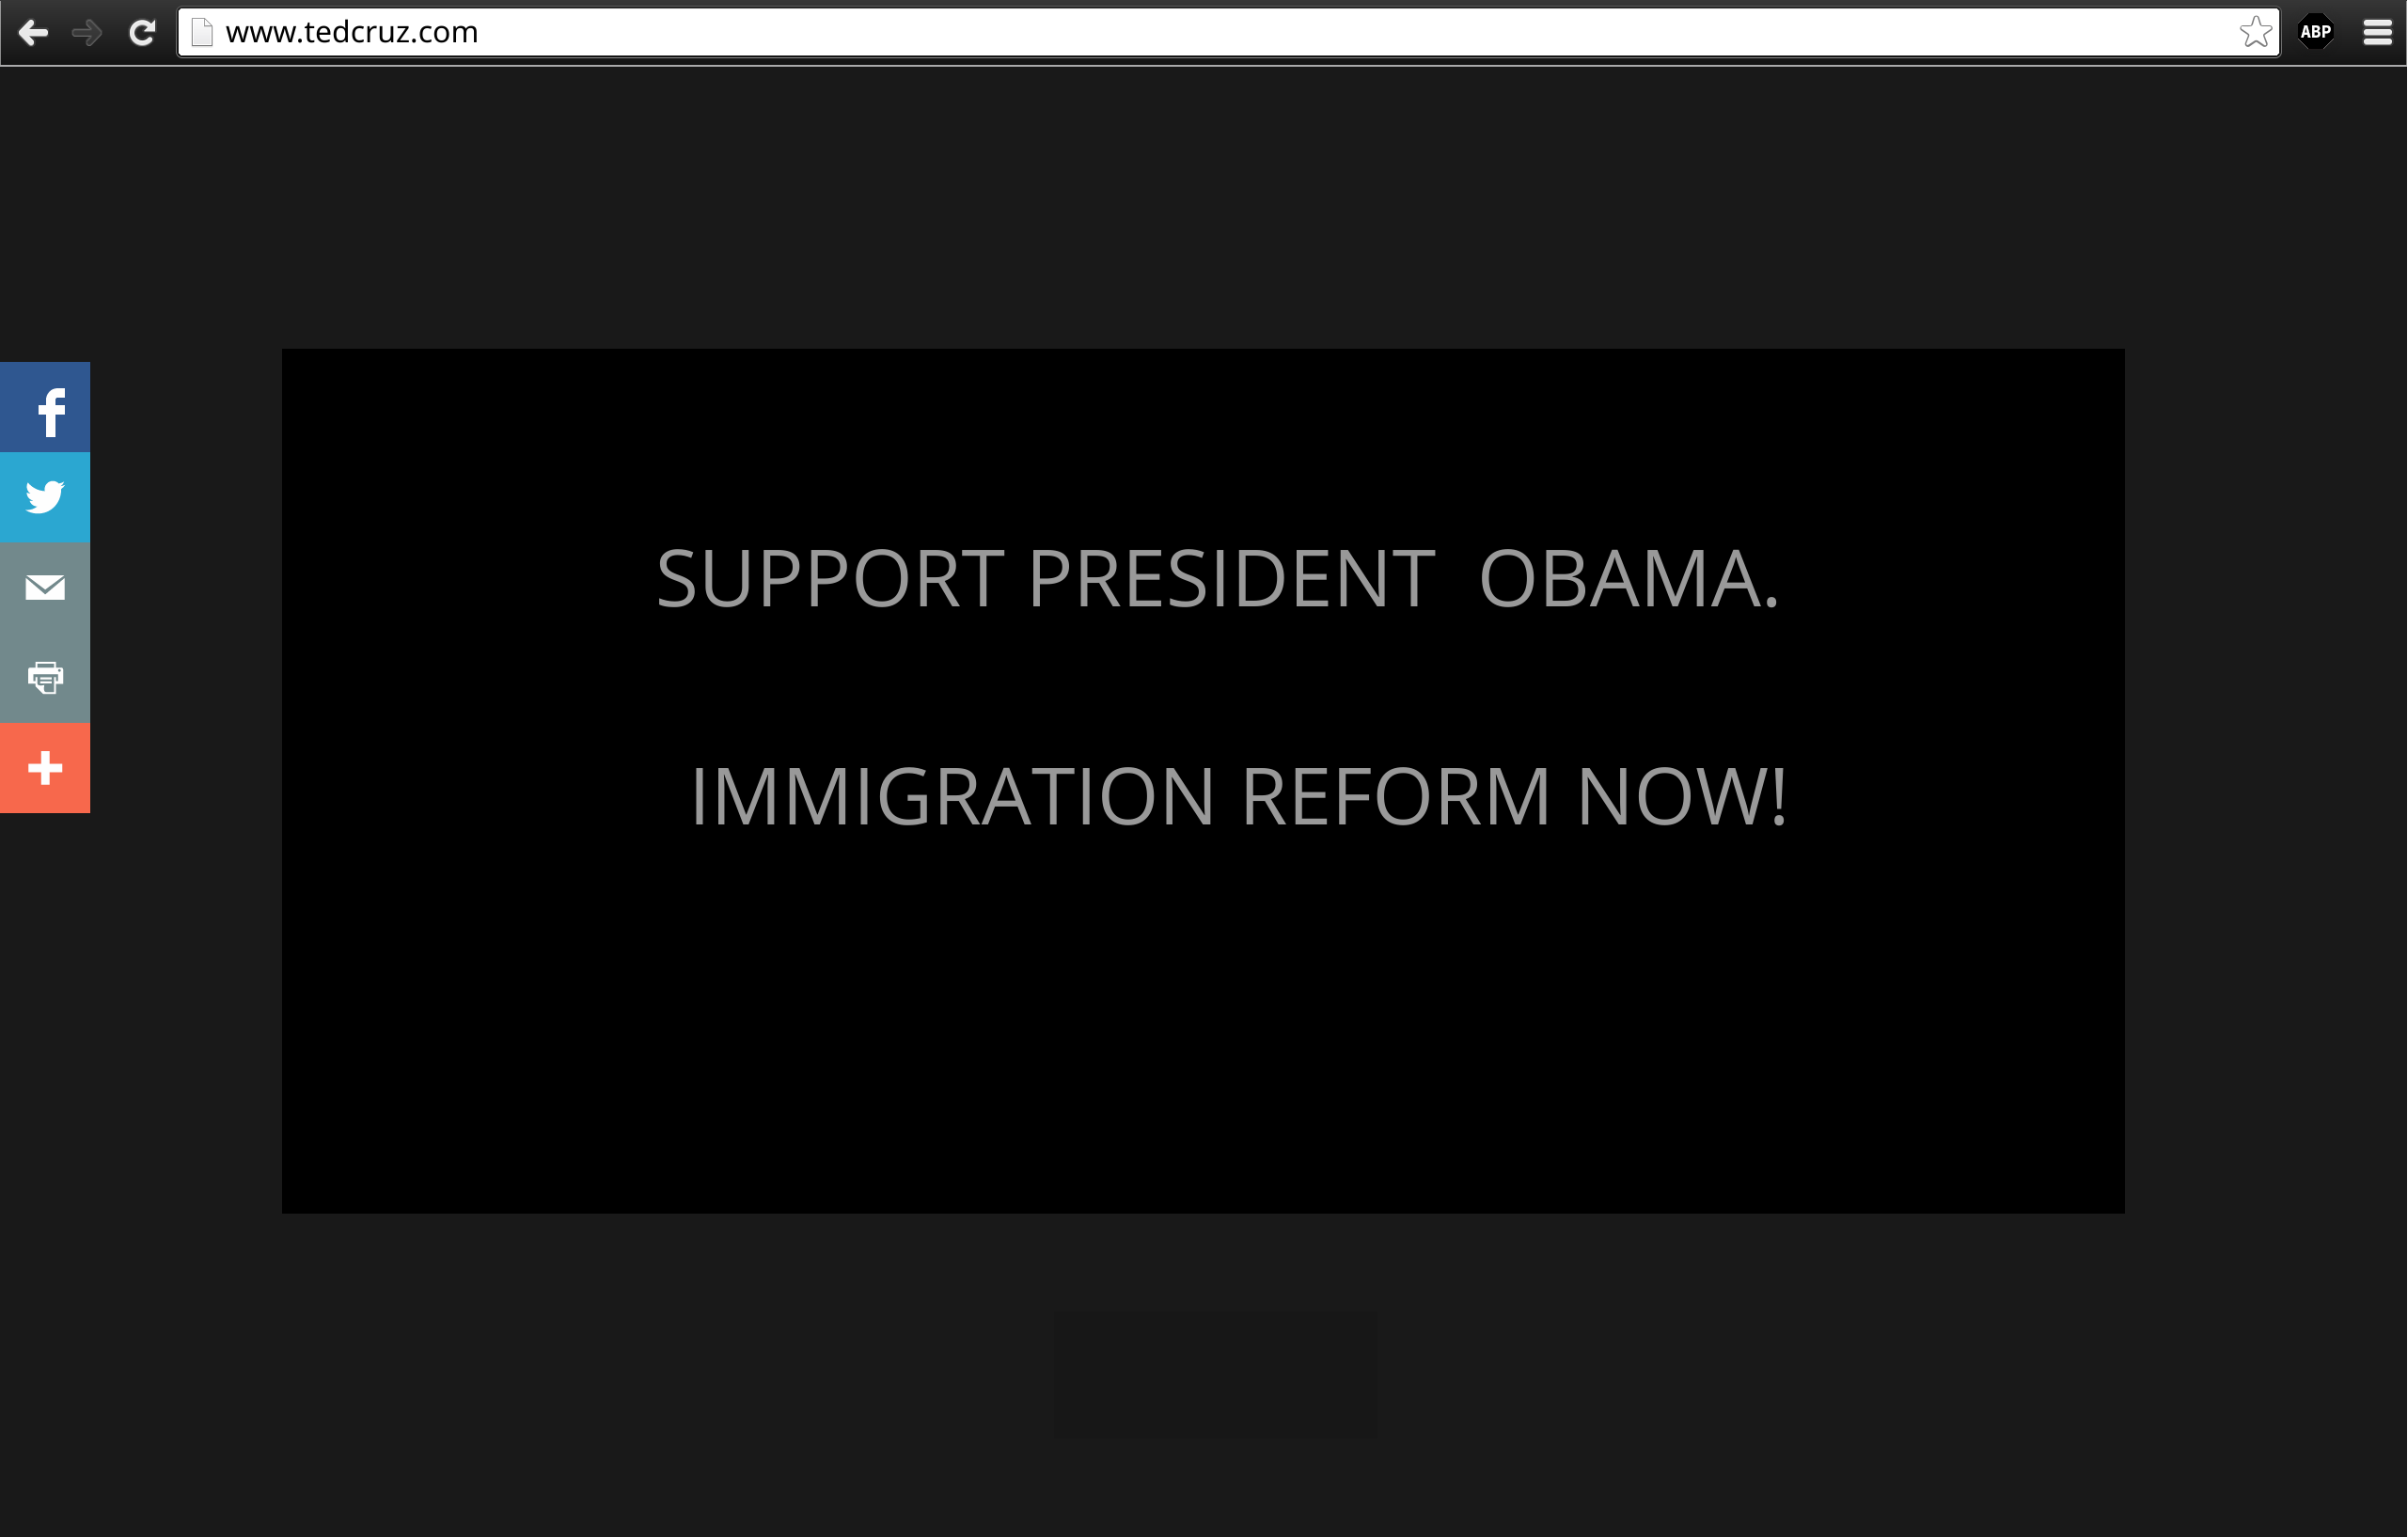 www.tedcruz.com, showing the notice "Support President Obama. / Immigration Reform Now!"